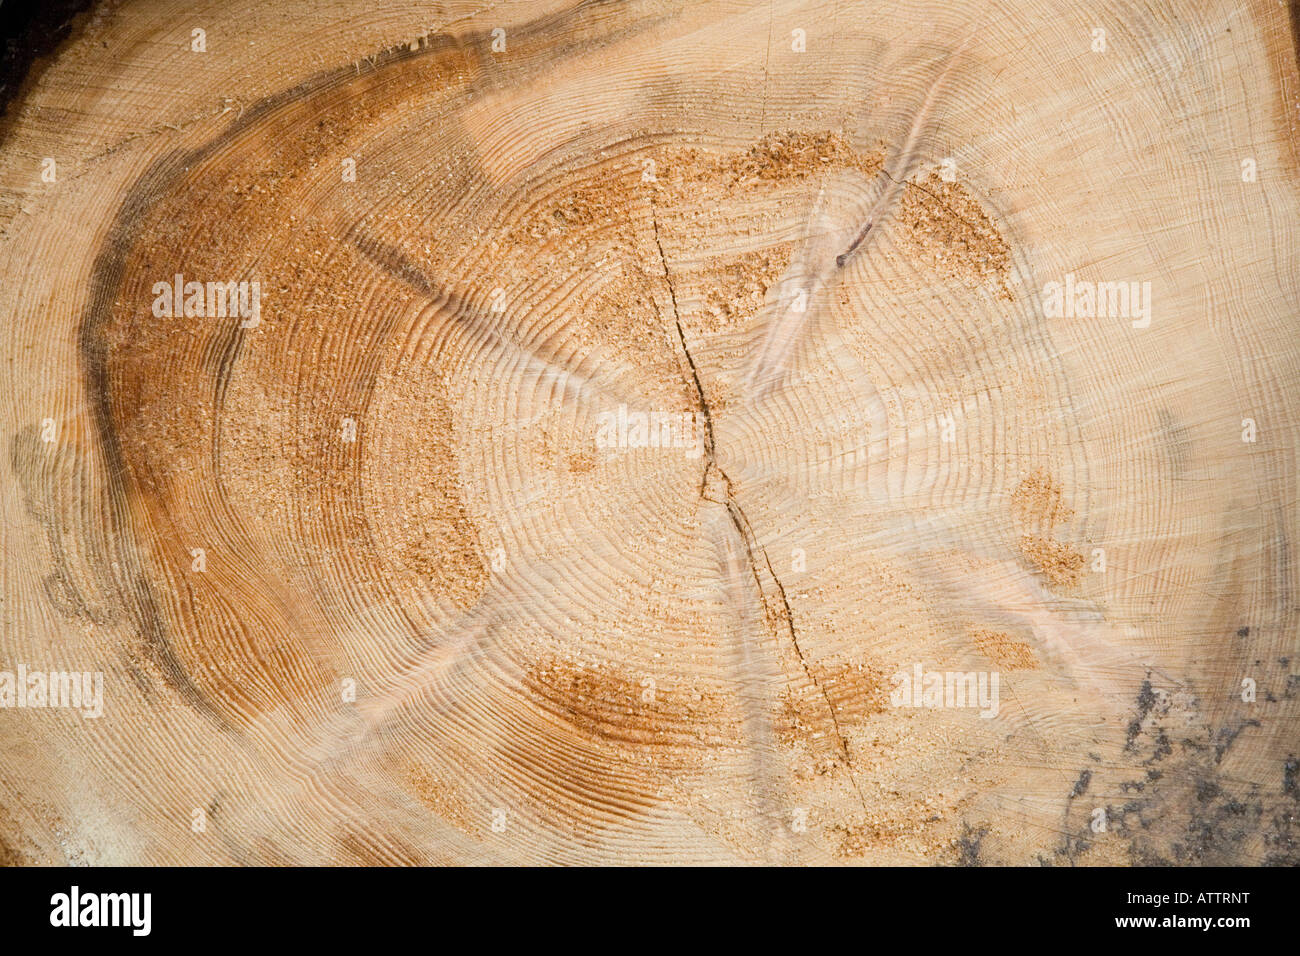 Historical weather information, growth, age rainfall temperature, climate change data in felled Larch Logs showing tree rings Cairngorms, Scotland UK Stock Photo